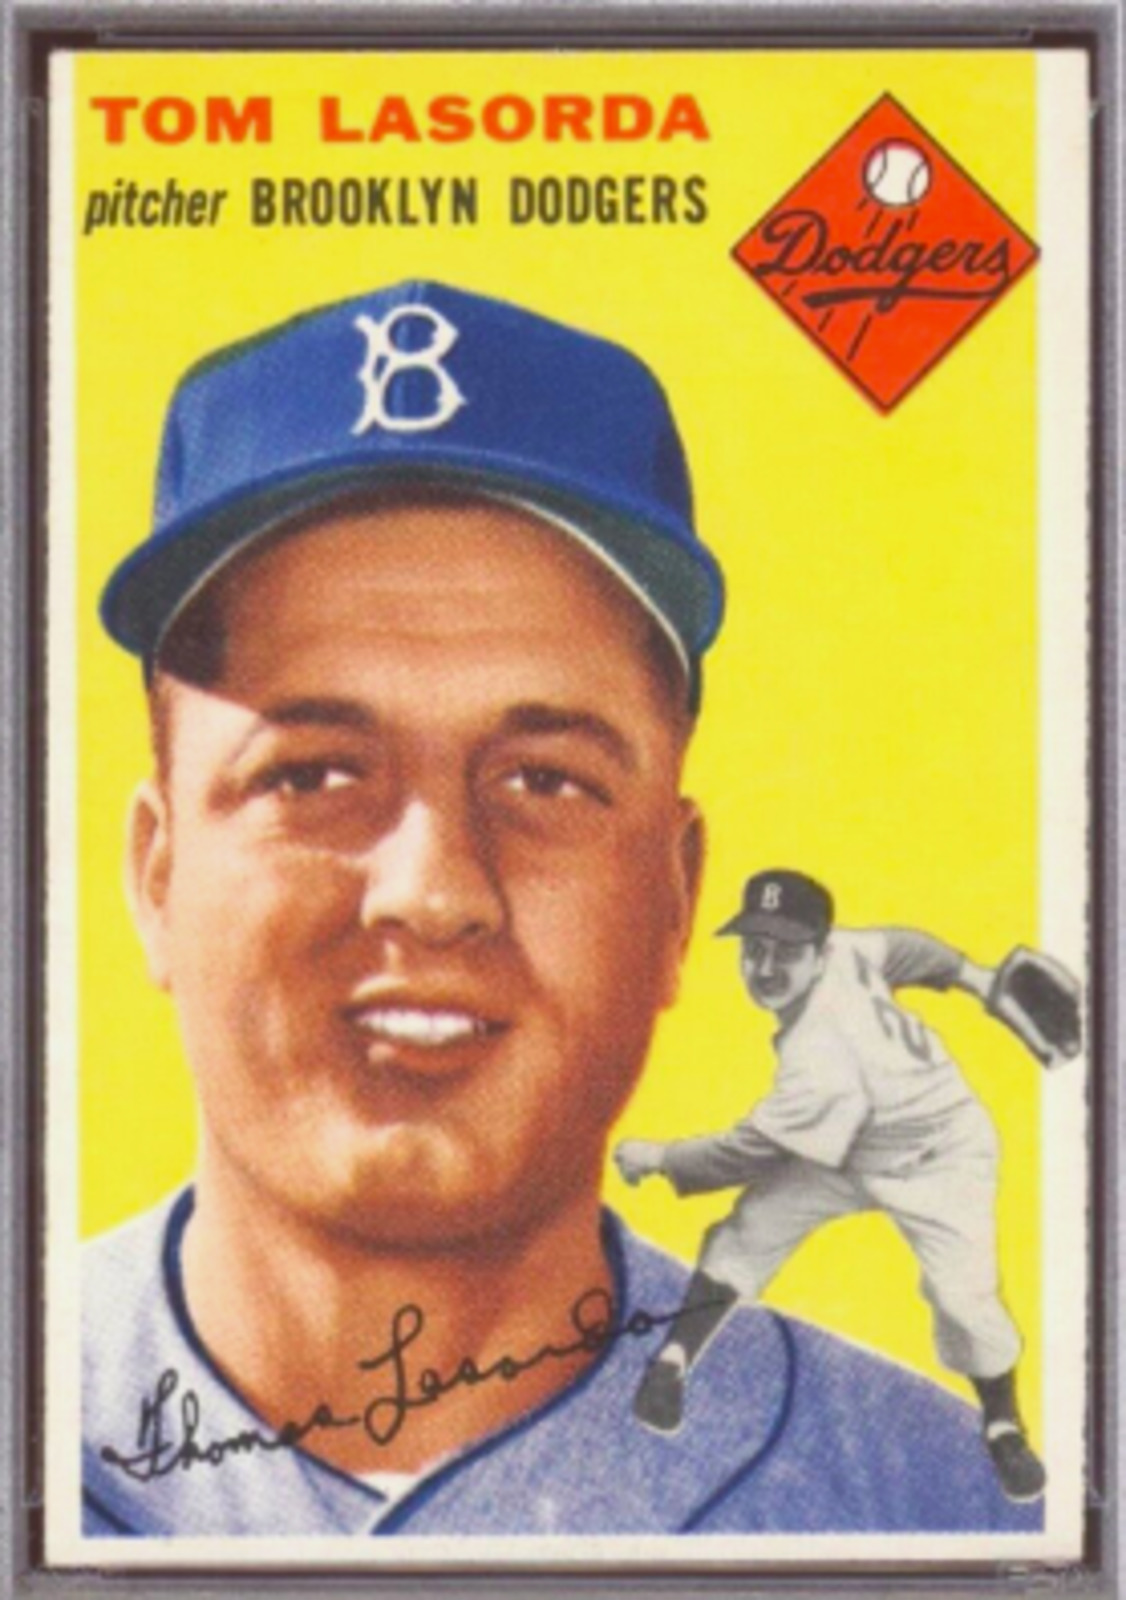 1954 Topps Tommy LaSorda rookie card